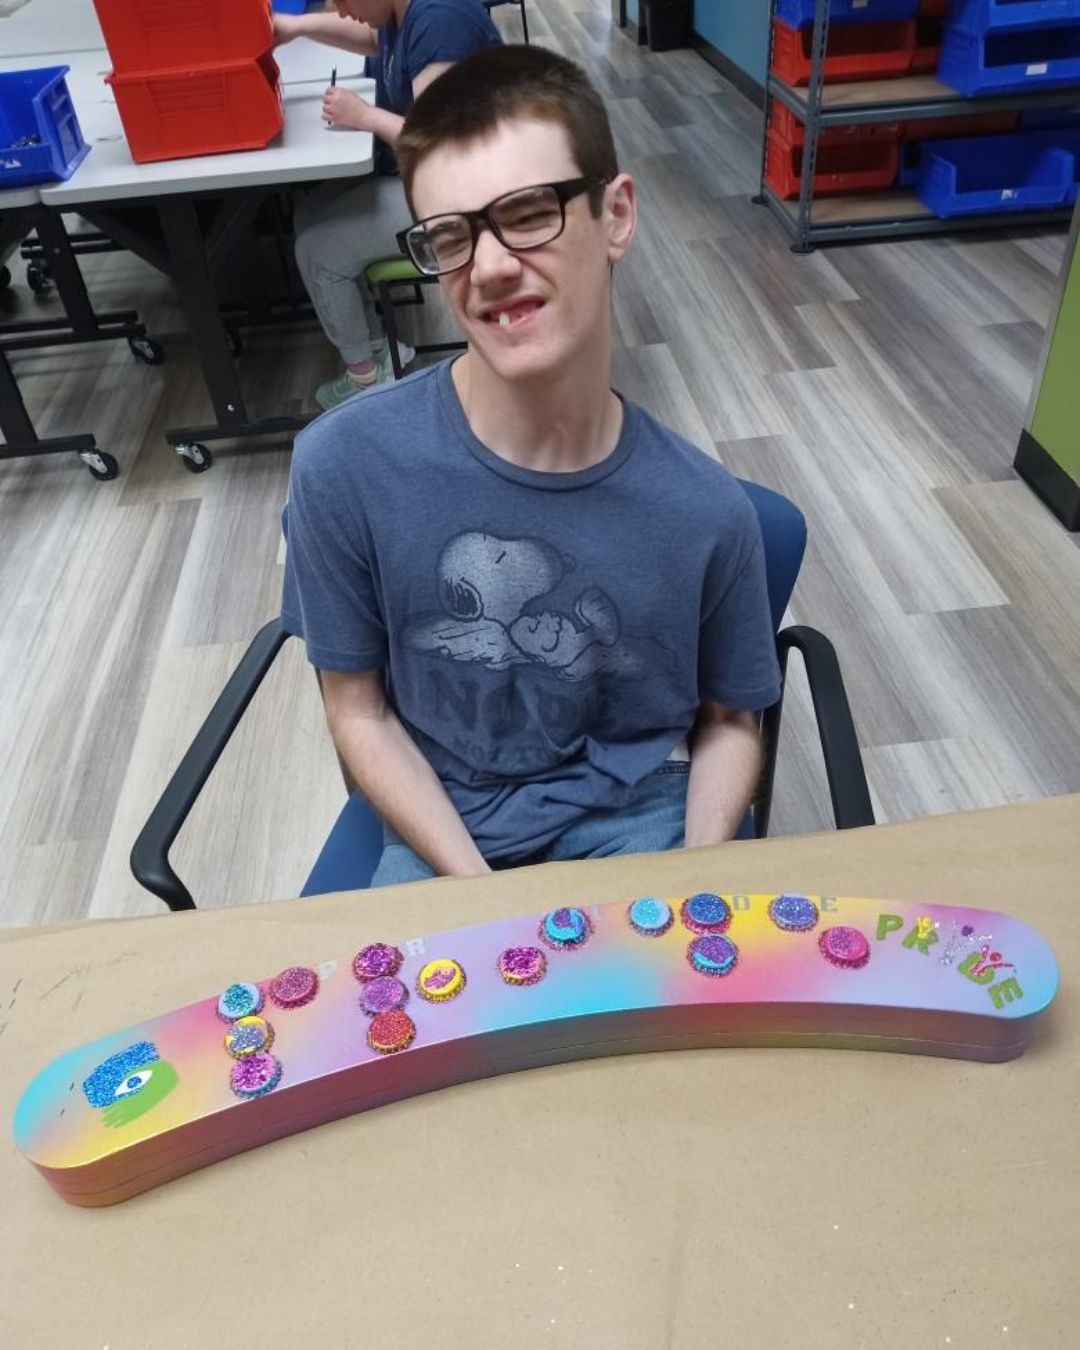 A young man sitting a table smiling as his artwork piece is in front of him.